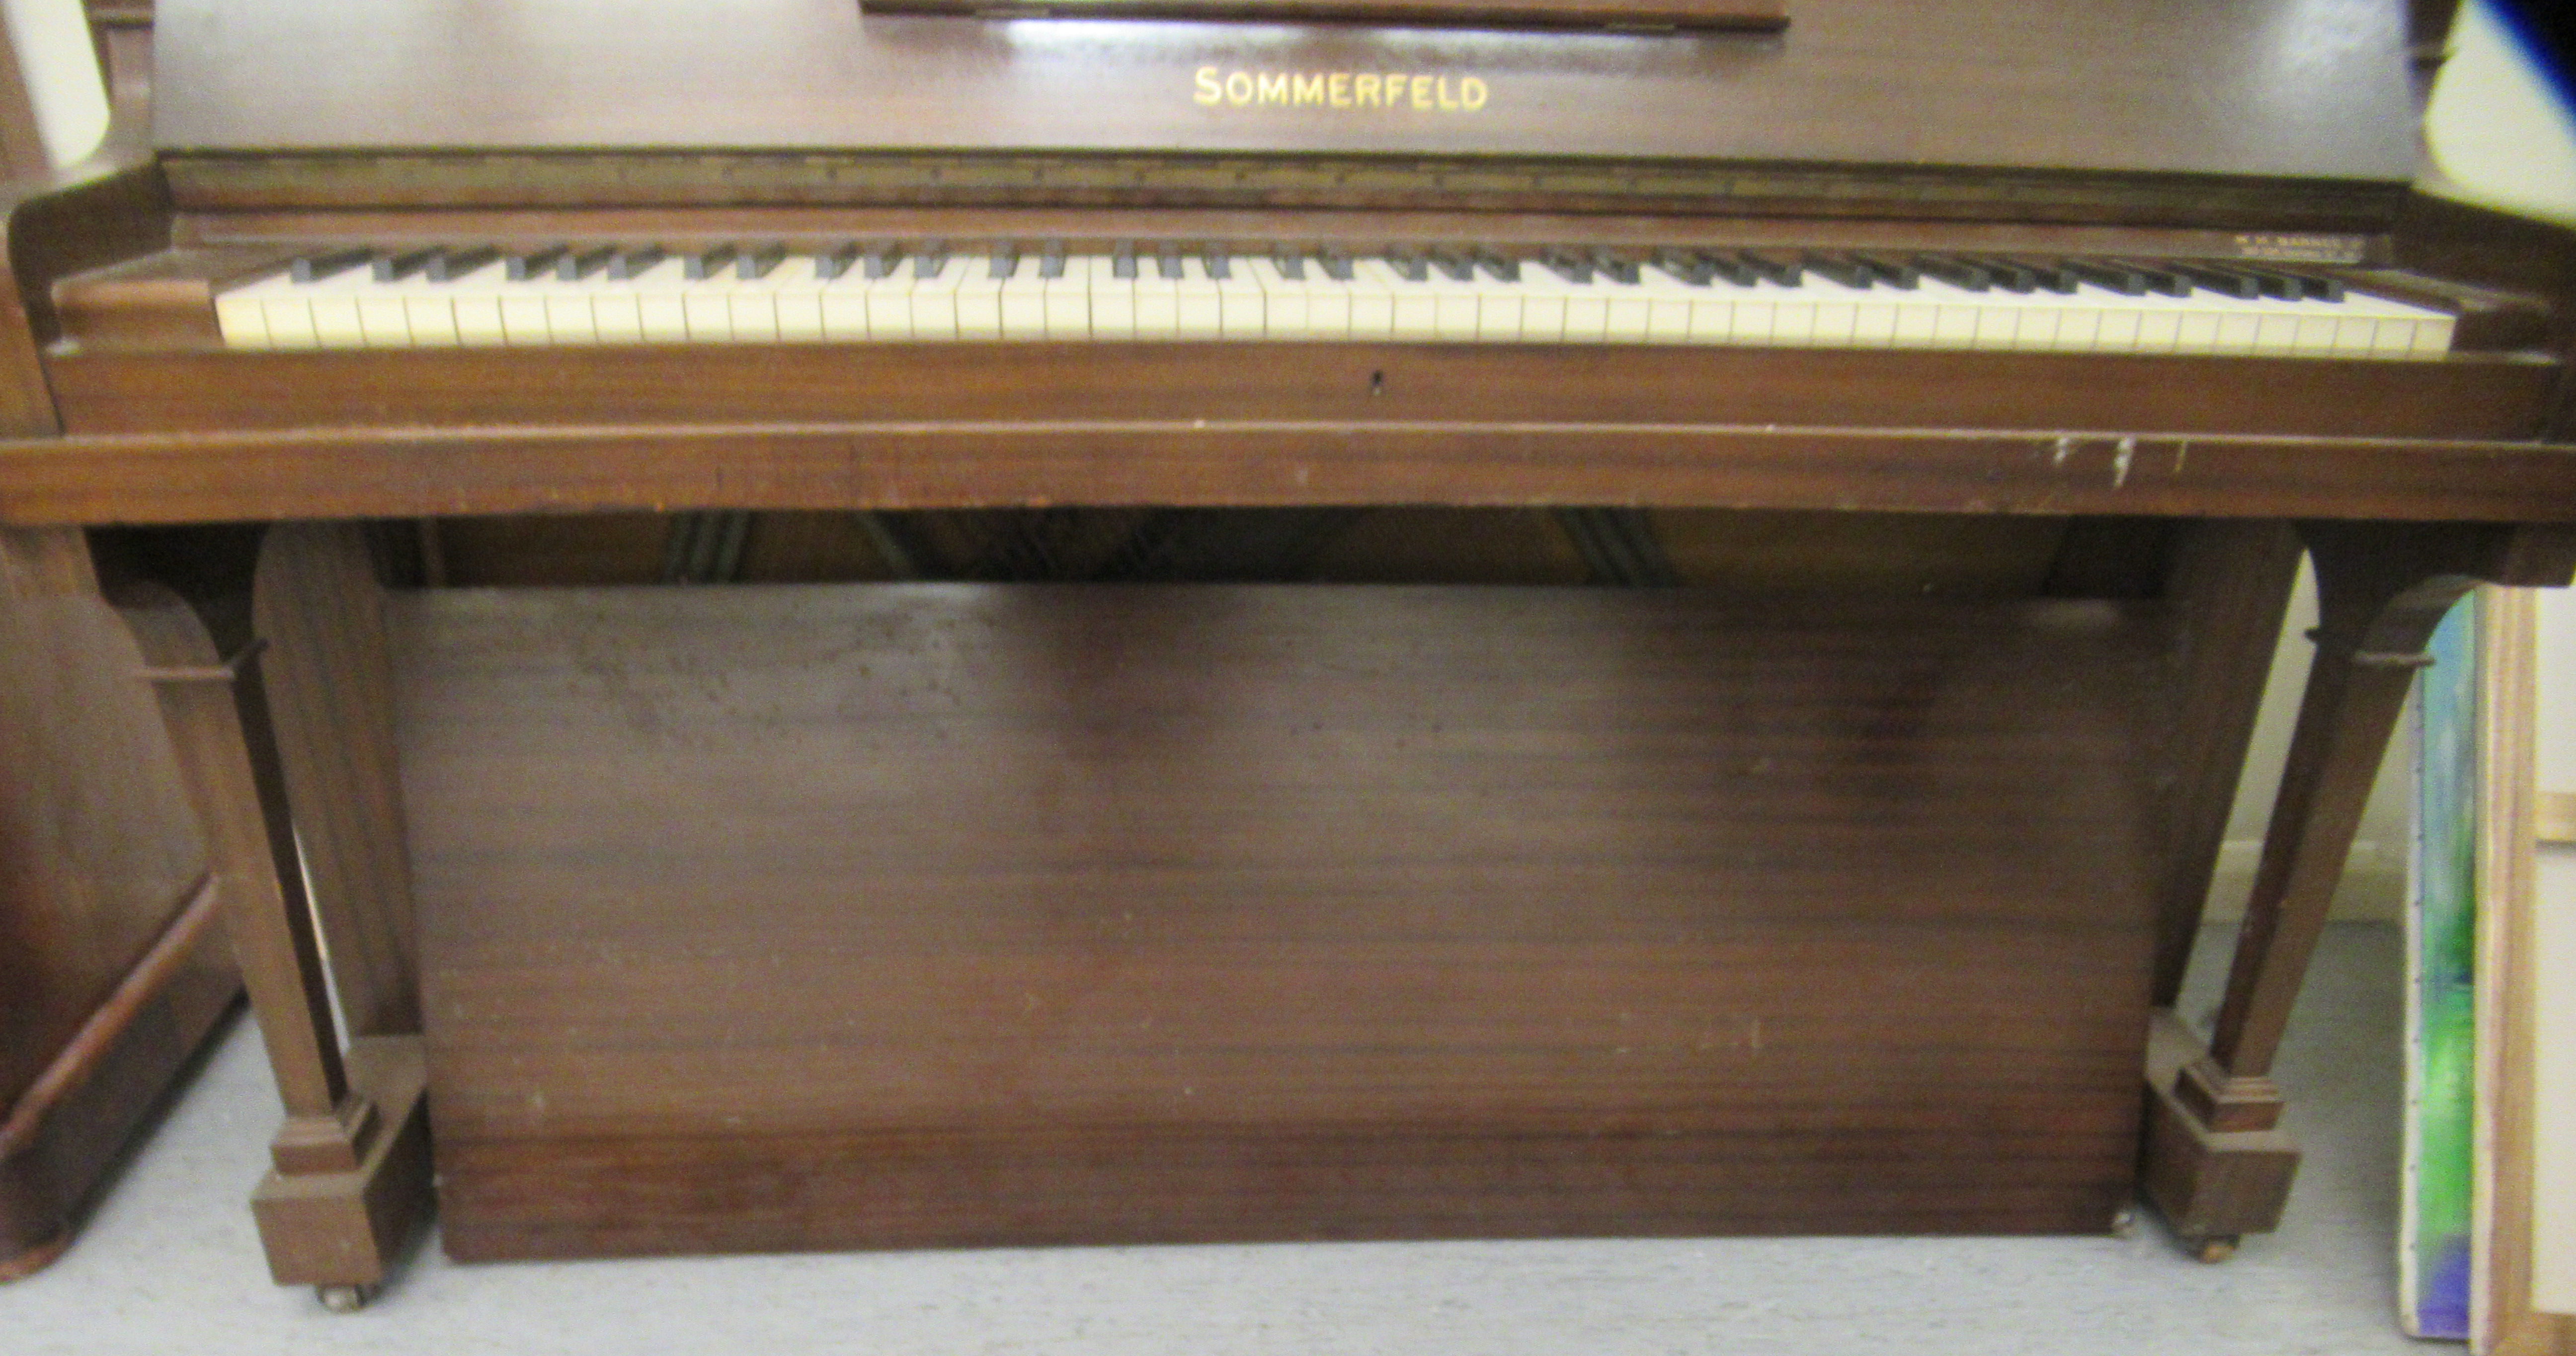 A B Sommerfeld mahogany cased iron framed, overstrung upright piano, no.5729 with forward - Image 8 of 8